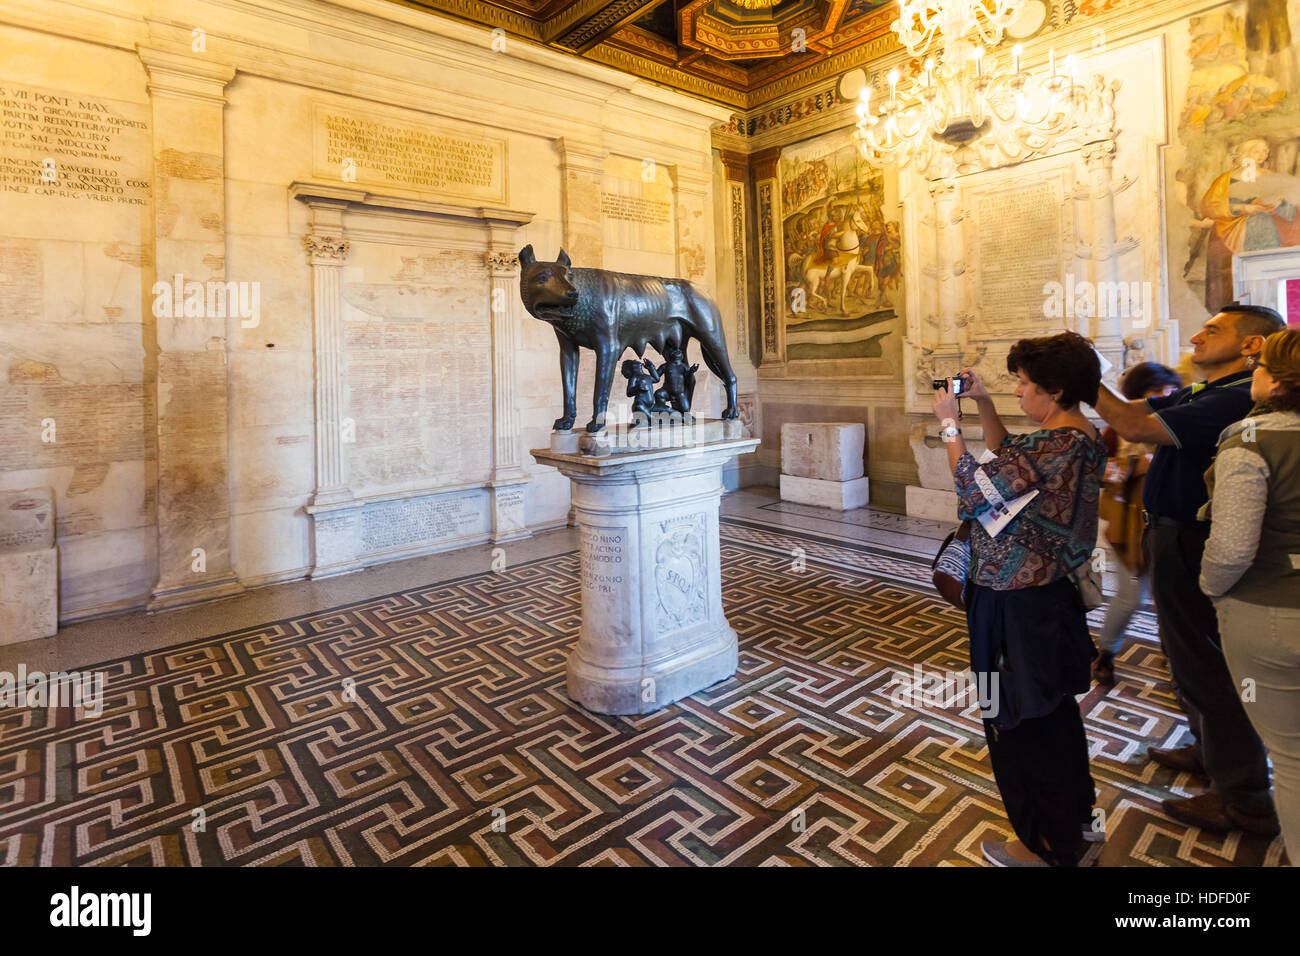 ROME, ITALY - OCTOBER 31, 2016: tourists in room of Capitoline Museums in Palazzo dei Conservatori (Palace of the Conservators) in Rome. Art and Arche Stock Photo